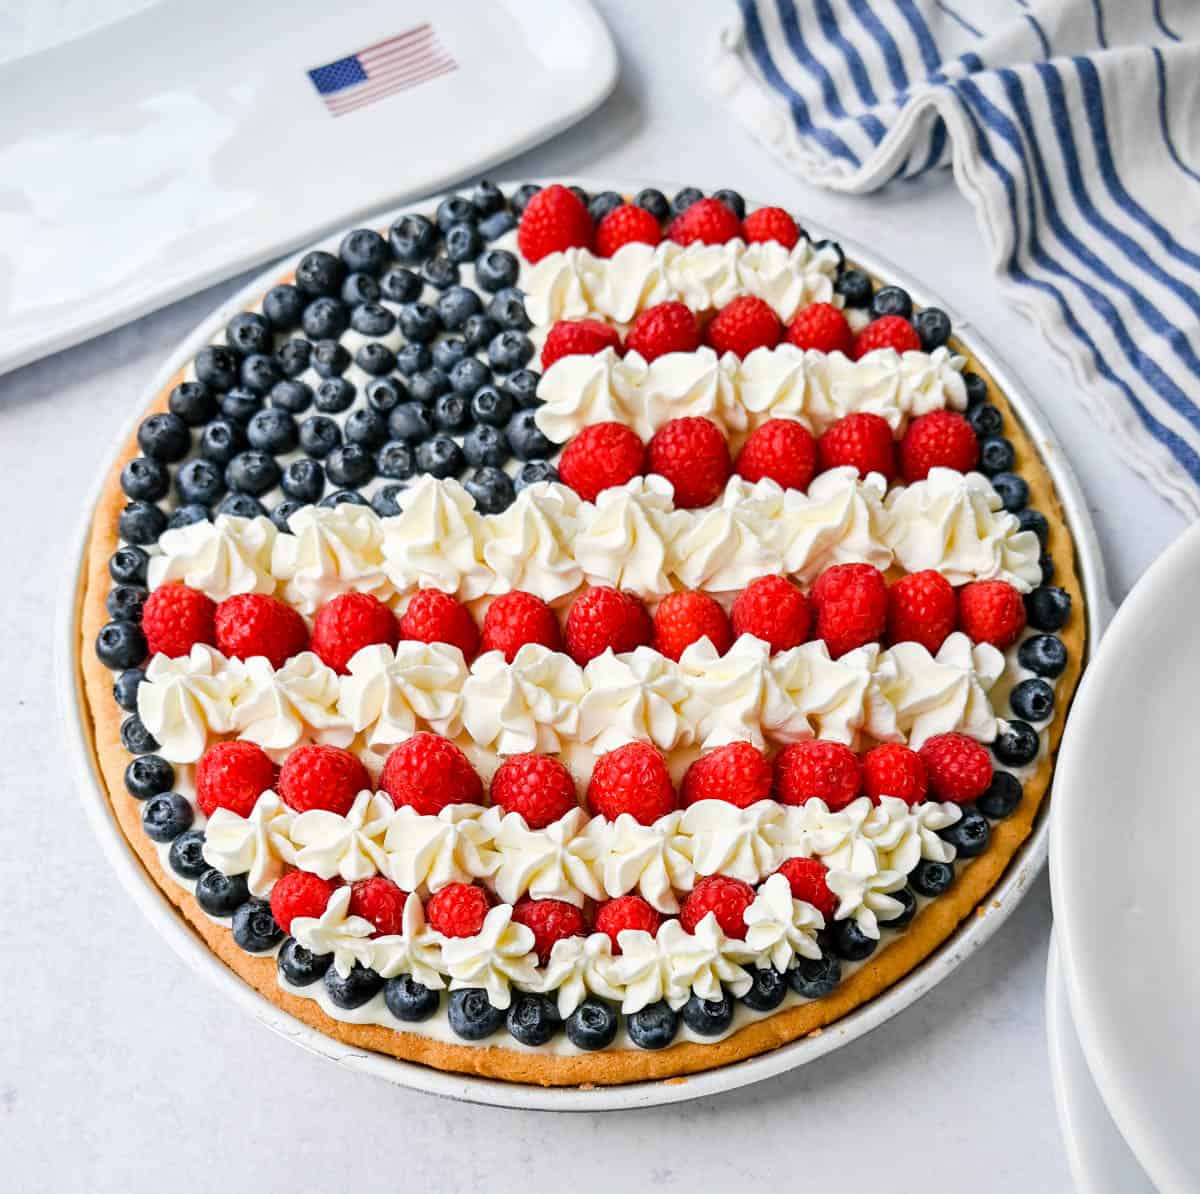 This flag sugar cookie fruit pizza is a festive, delicious, and beautiful patriotic 4th of July dessert featuring a homemade soft sugar cookie crust with a sweet vanilla cream cheese frosting topped with fresh raspberries, blueberries, and homemade whipped cream. 